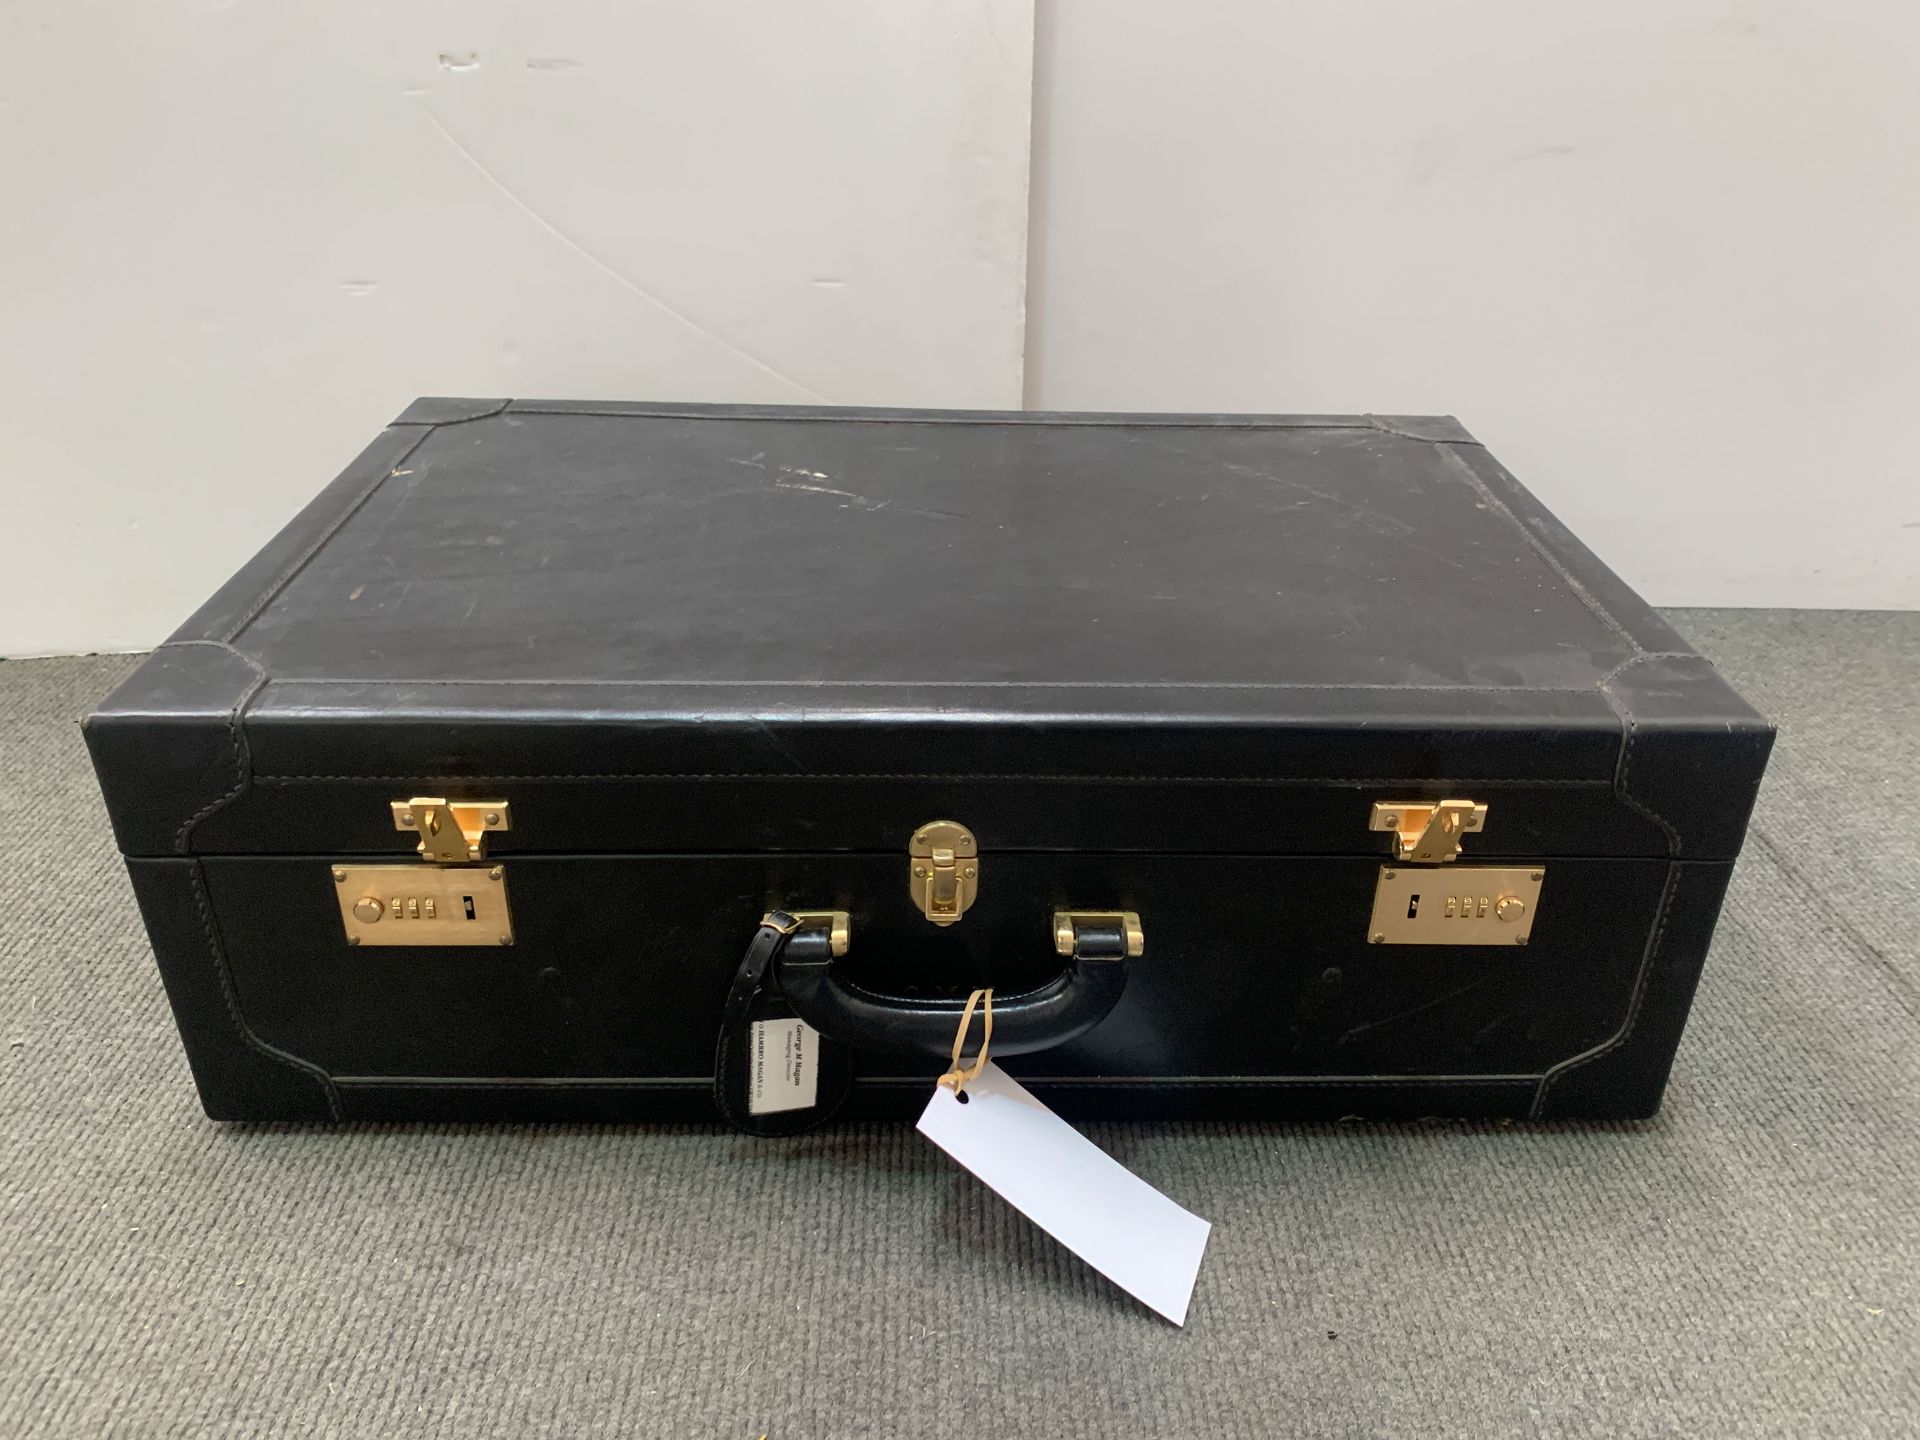 Asprey Black Leather Suitcase with Brass Details